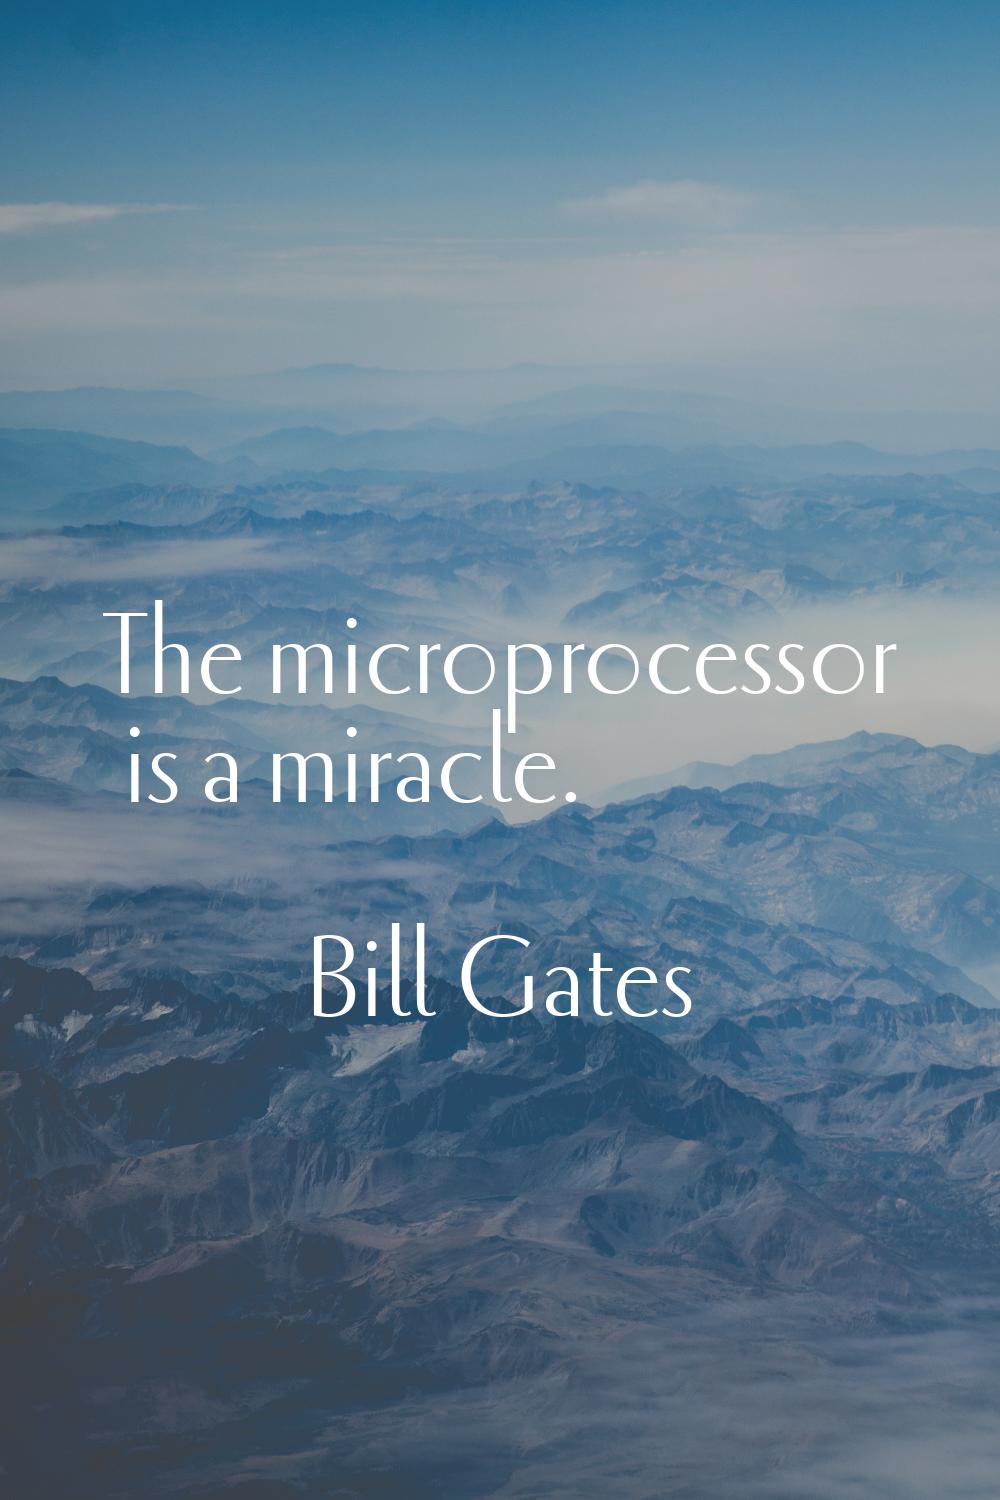 The microprocessor is a miracle.